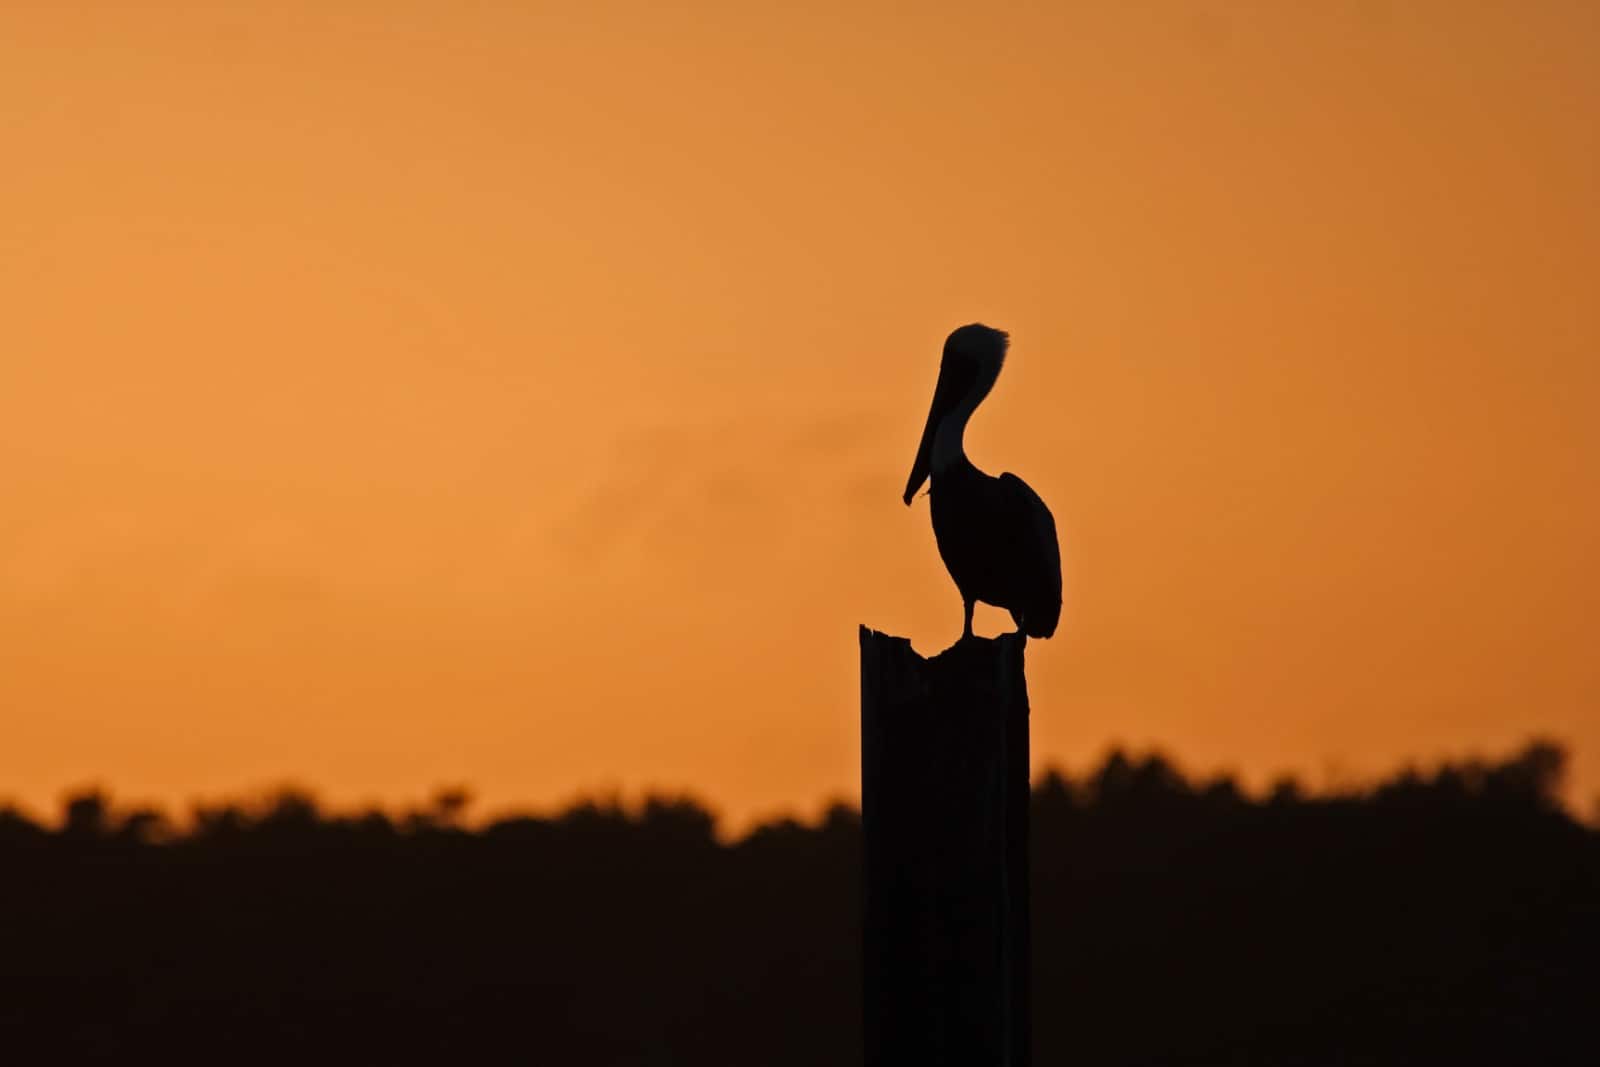 A solitary brown pelican in Biscayne National Park Florida